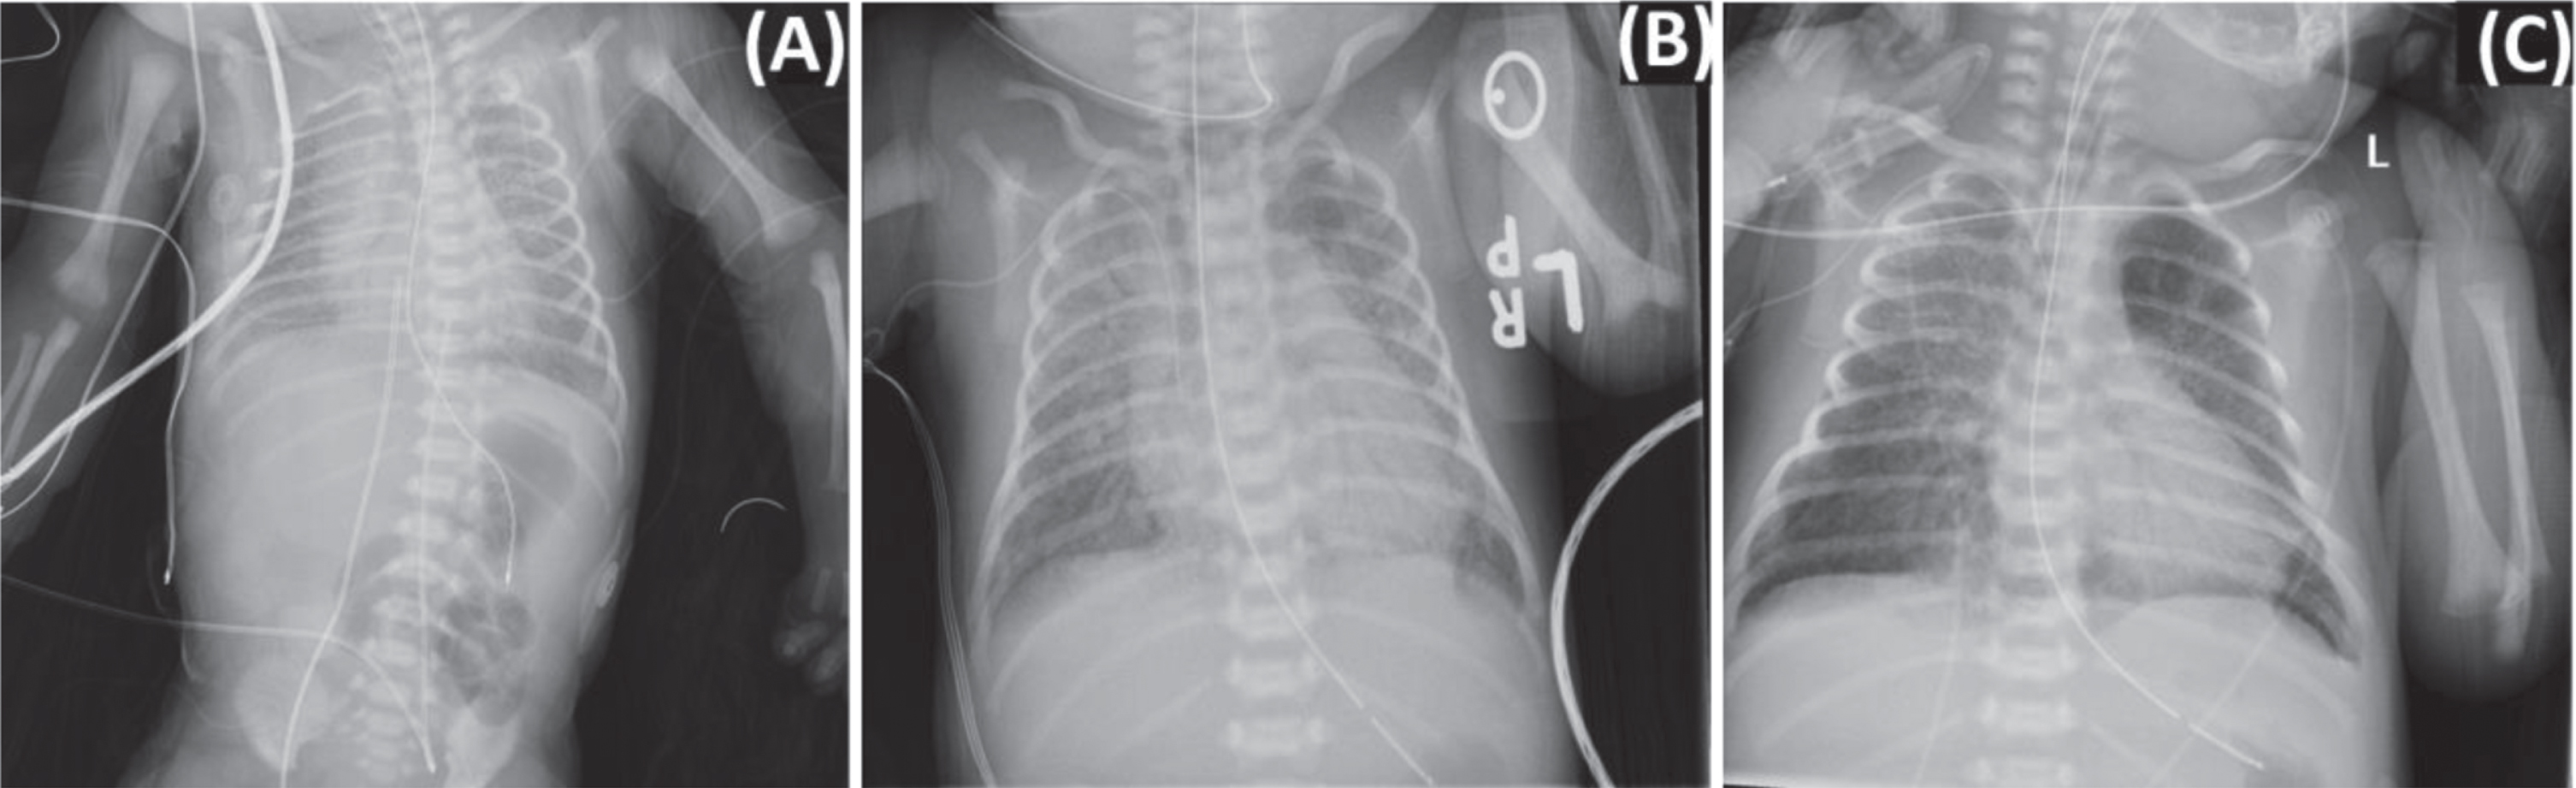 Case report X-ray findings. Chest X-ray revealing coarse interstitial opacities and air bronchograms bilaterally (A). Nine days after birth, chest X-ray revealed bilateral diffuse interstitial infiltrates worse on the right (B). Bilateral opacities and multifocal infiltrates along the right upper lobe persisted on day of life 14 (C).